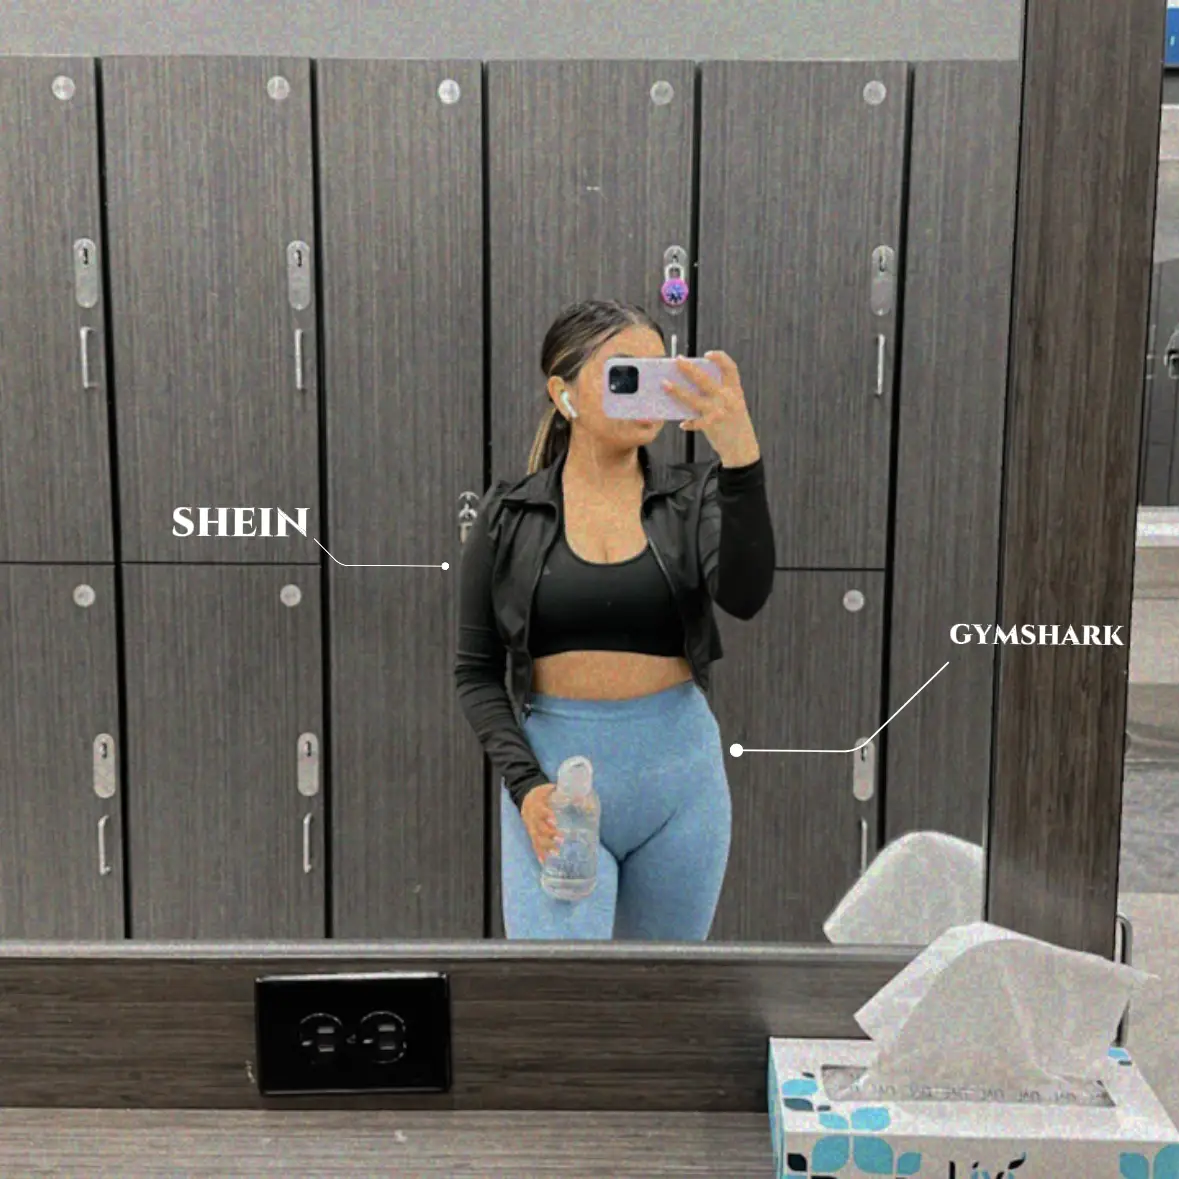 fitwithliz91 - SHEIN Activewear Haul🥰 Some Gymshark dupes